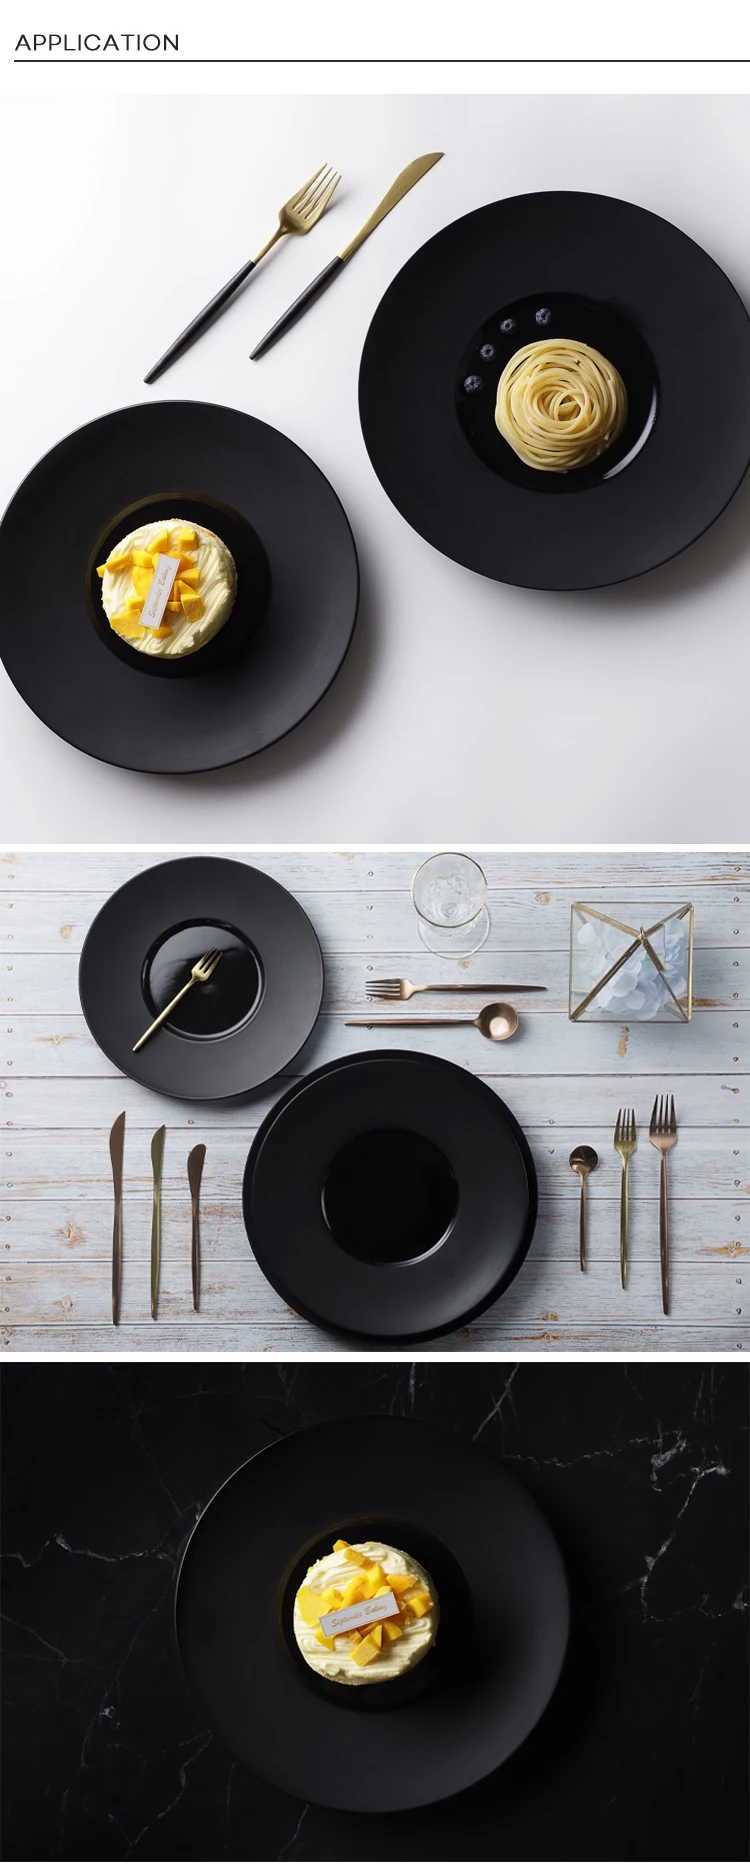 28ceramics Japanese Tableware Wholesale 10/11/12 Inch Black Charger Plates, 10/11/12 Inch Black Plates For Restaurant*